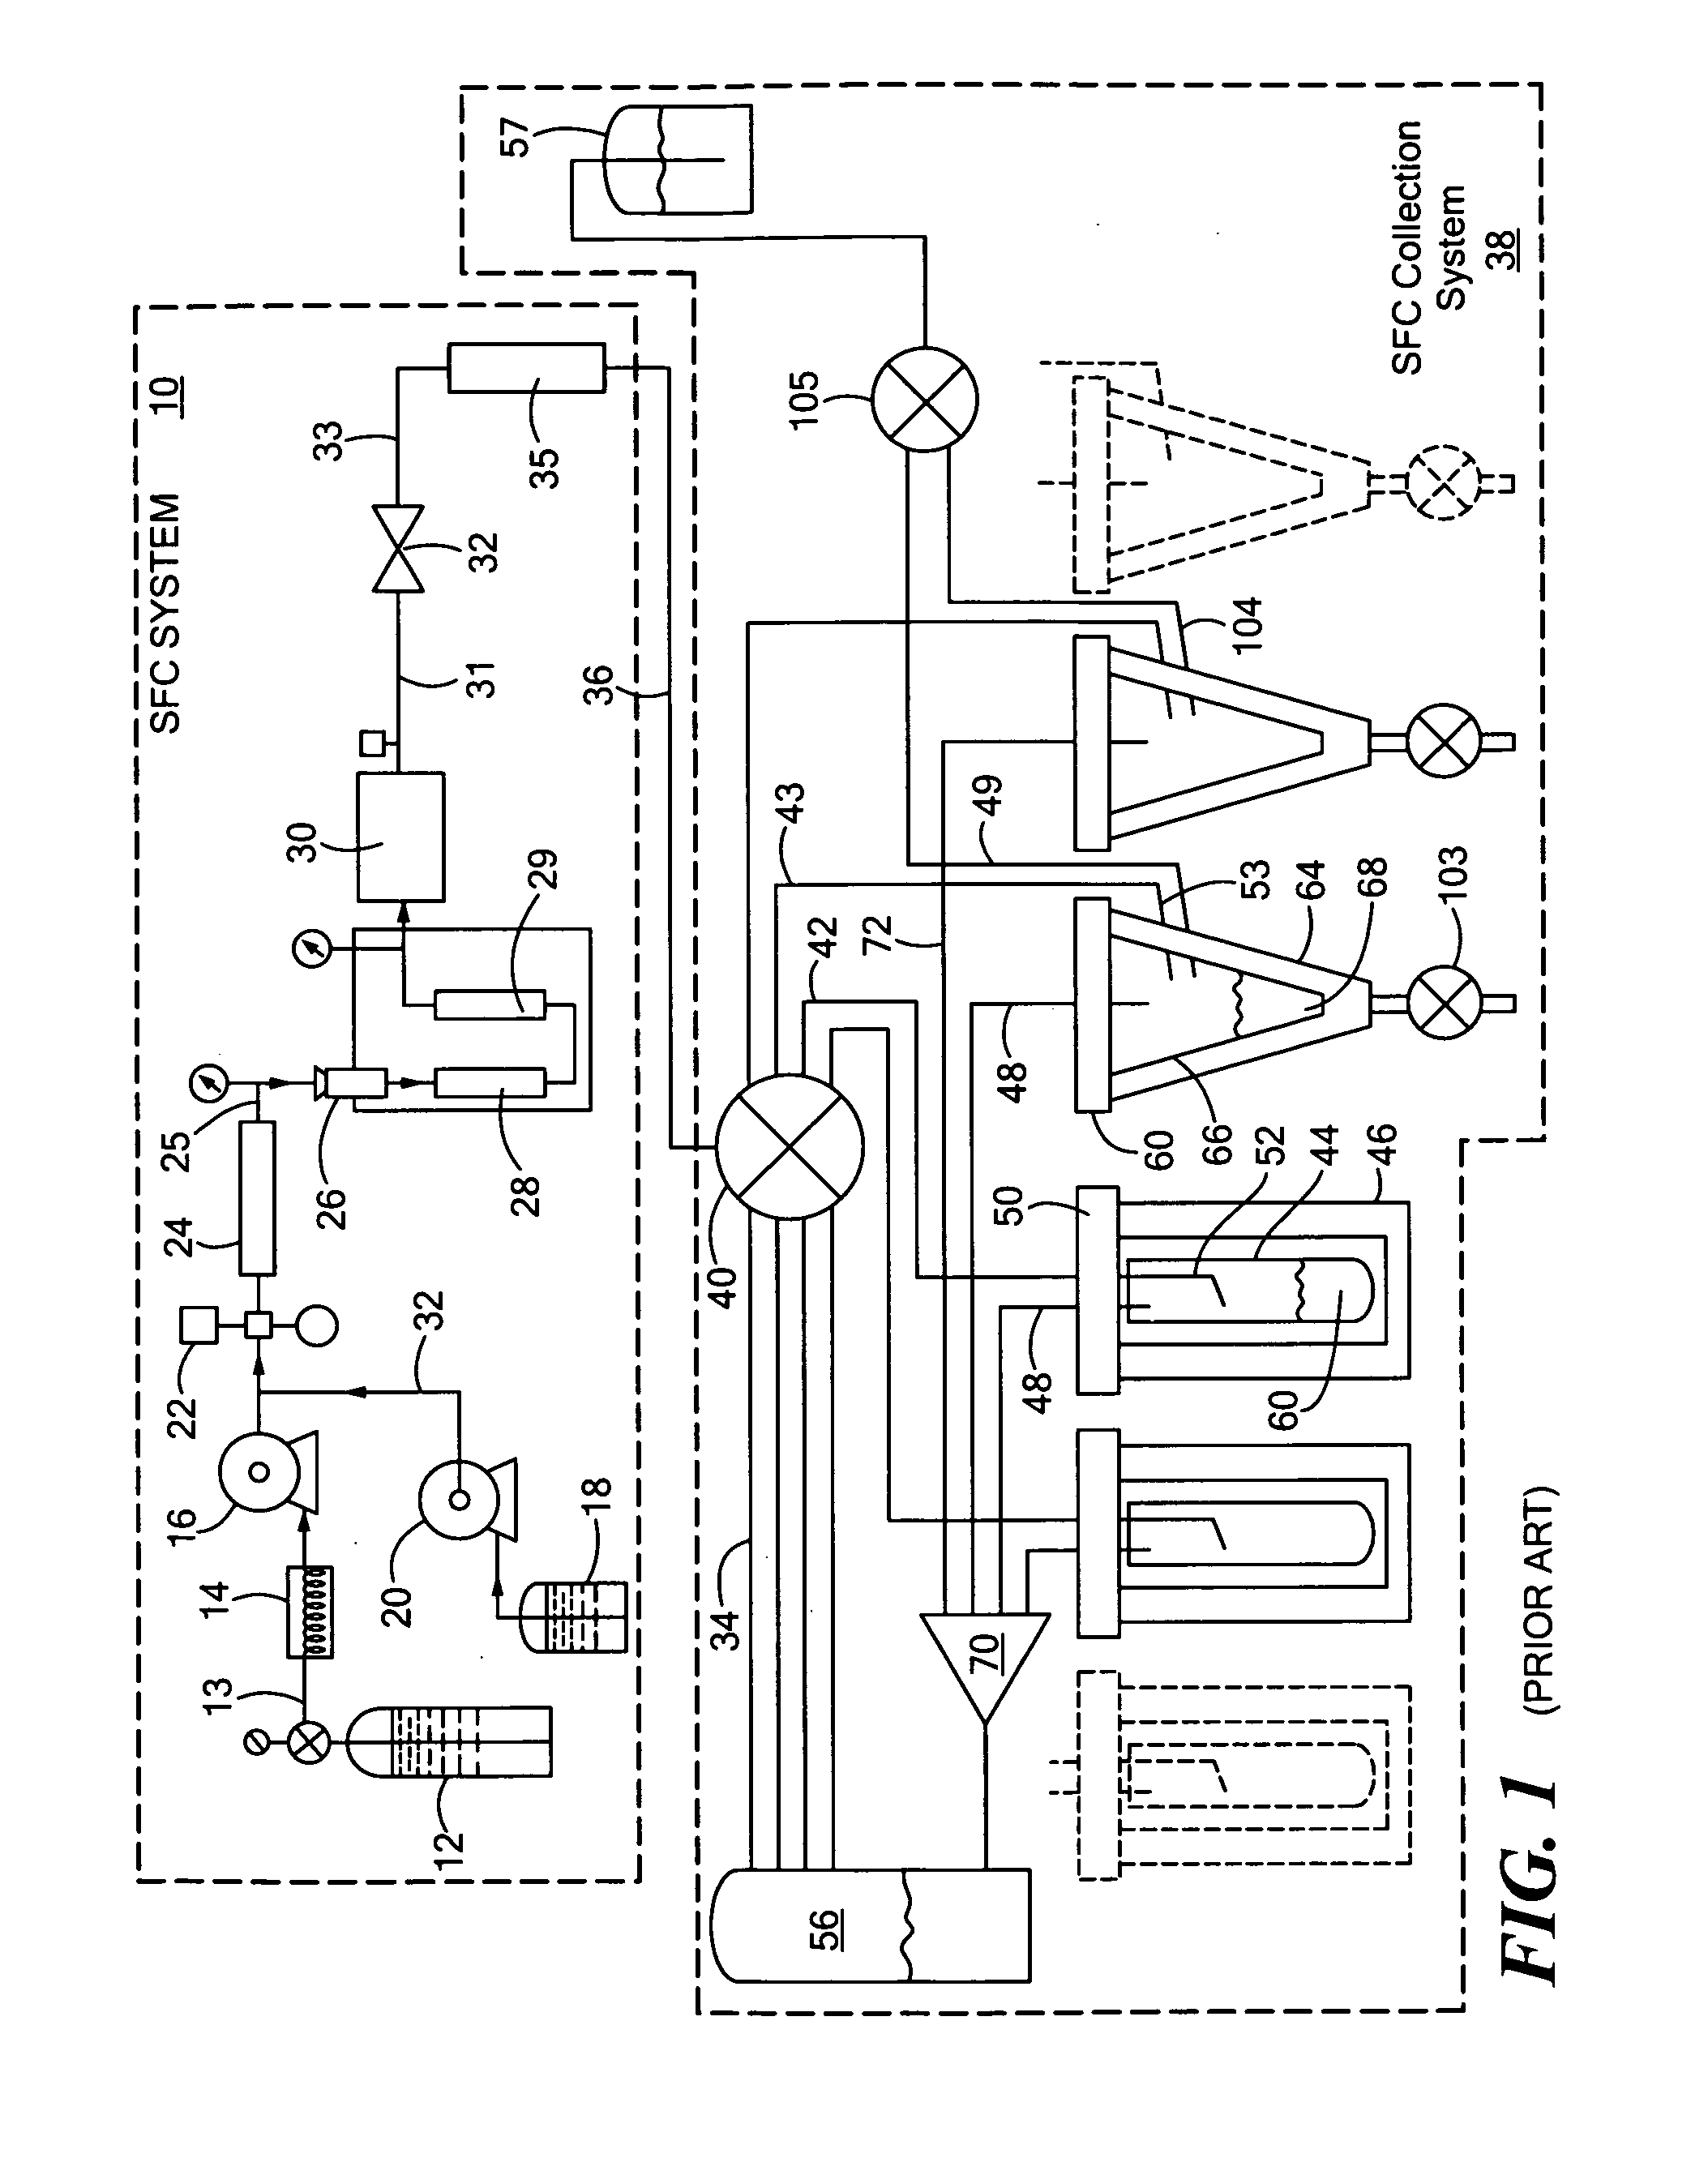 Centrifugal fraction collection system and method